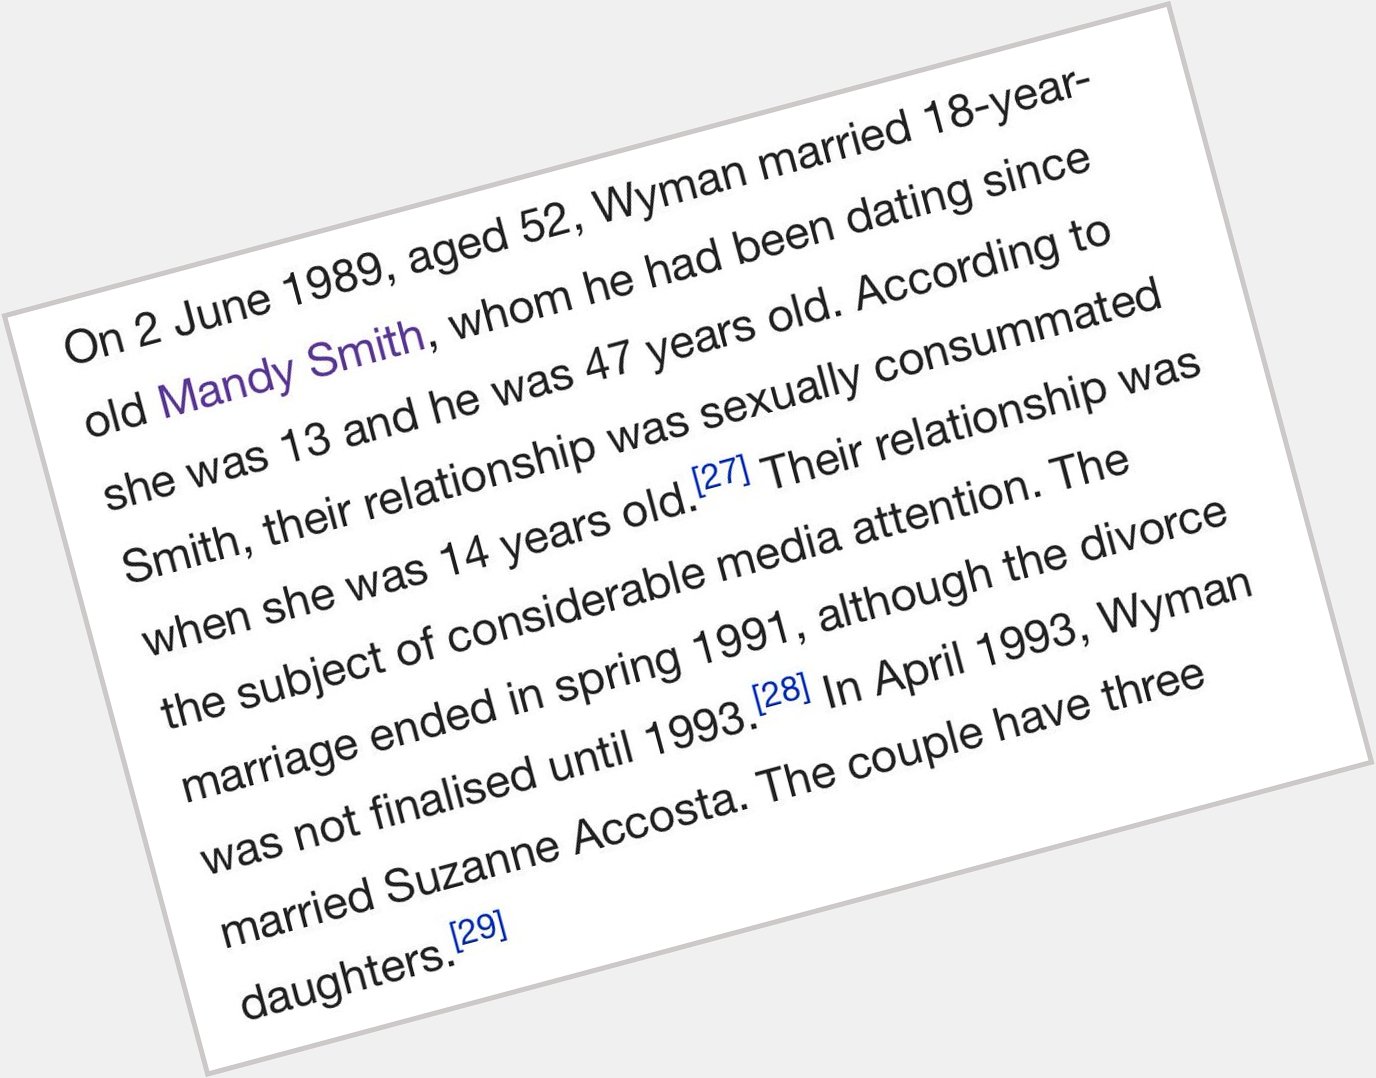 Happy 81st birthday Bill Wyman. His marriage to Mandy Smith remains fine in the eyes of the law 